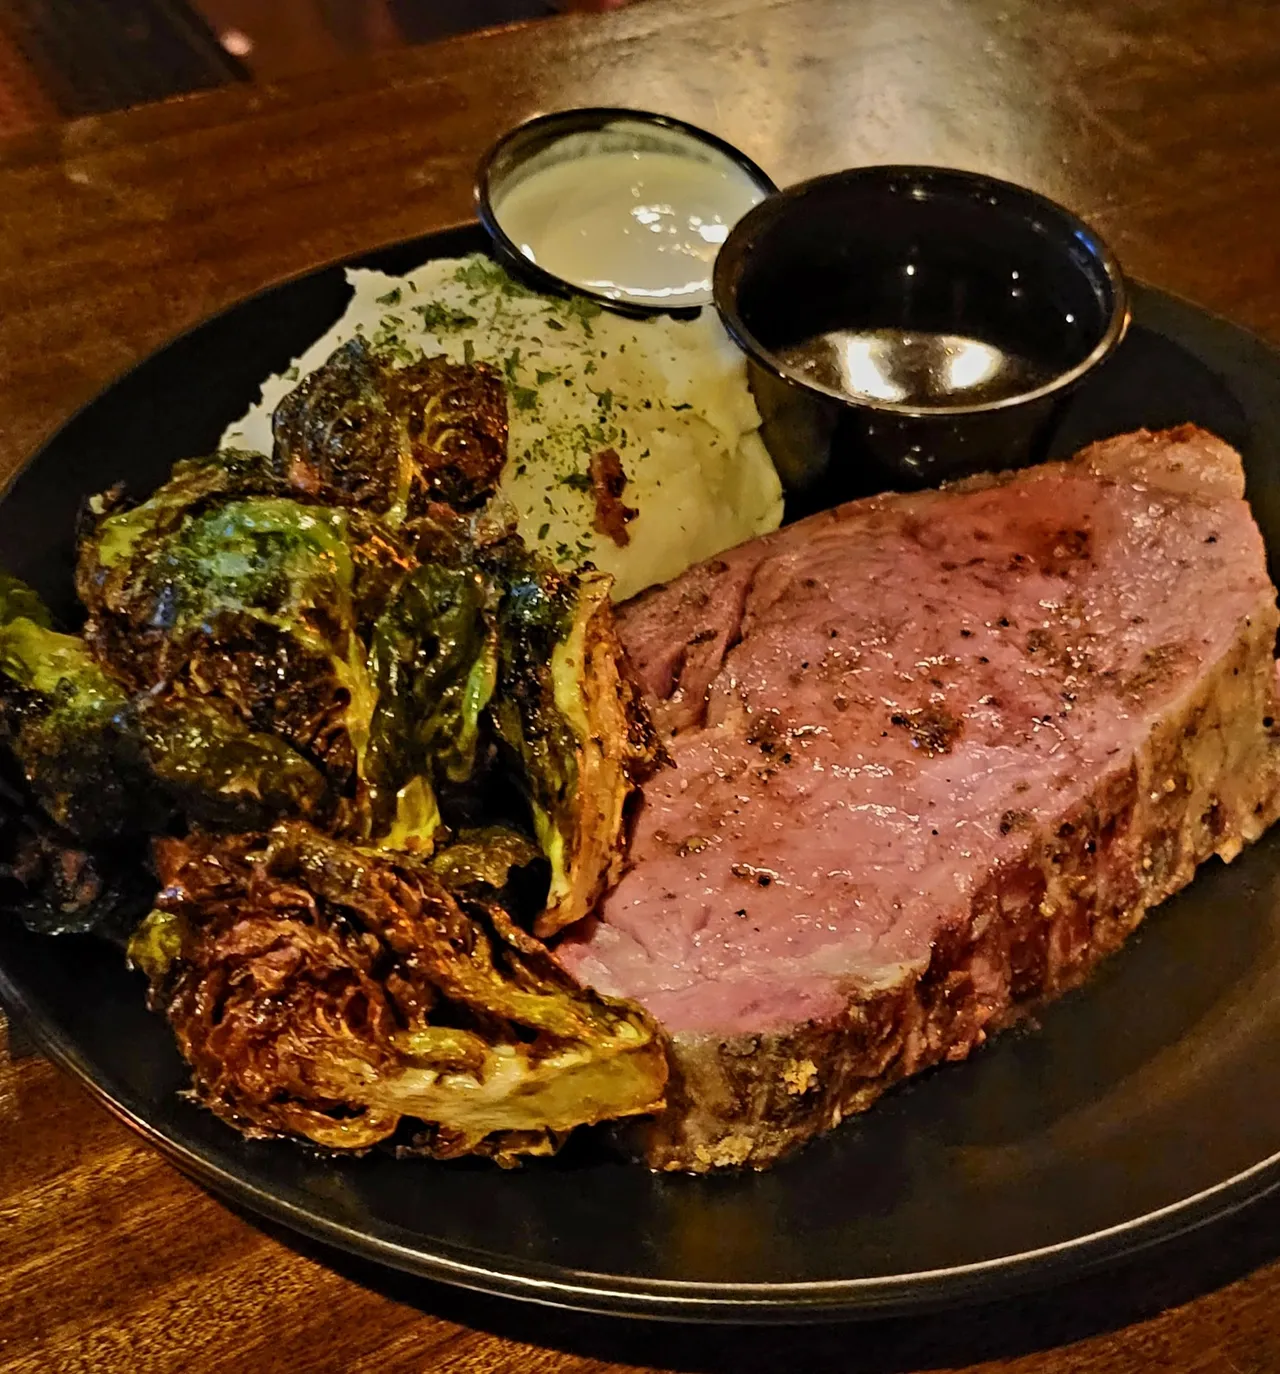 A plate of juicy steak, mashed potatoes, greens and various sauces.